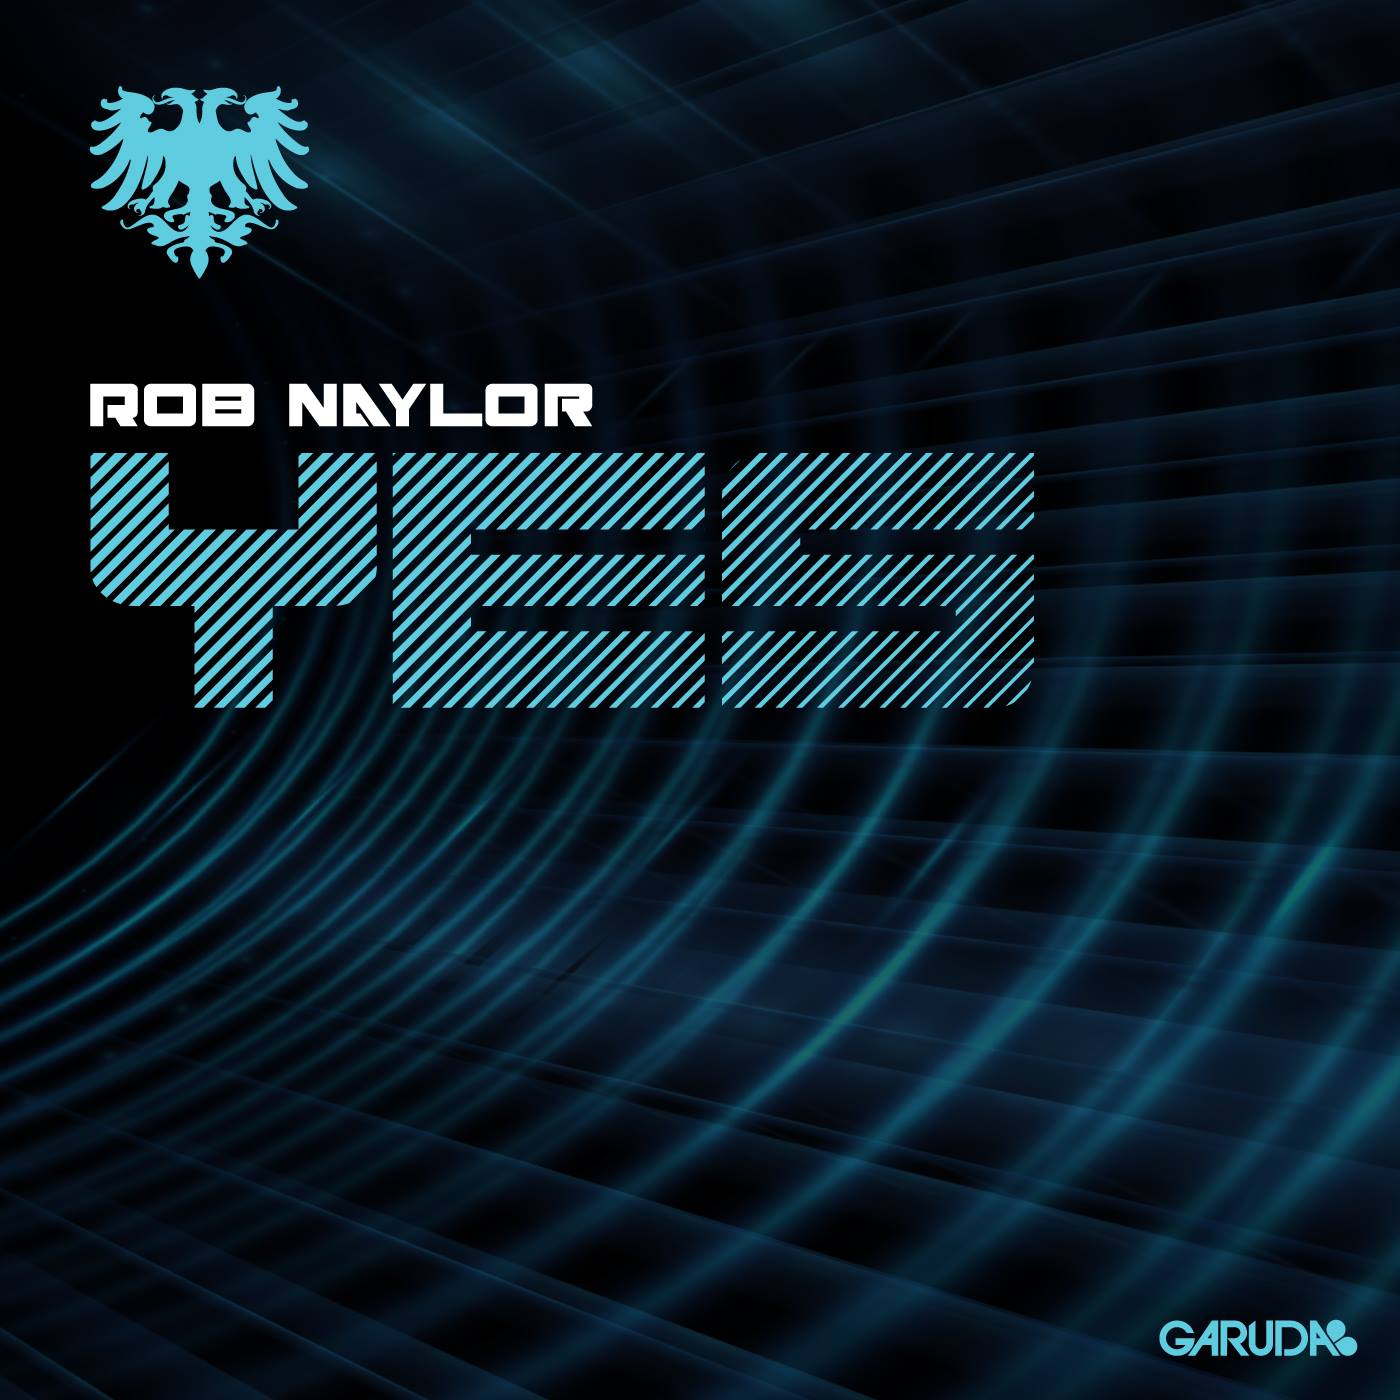 16 year old Rob Naylor’s debut track ‘Yes’ out on Garuda July 1!